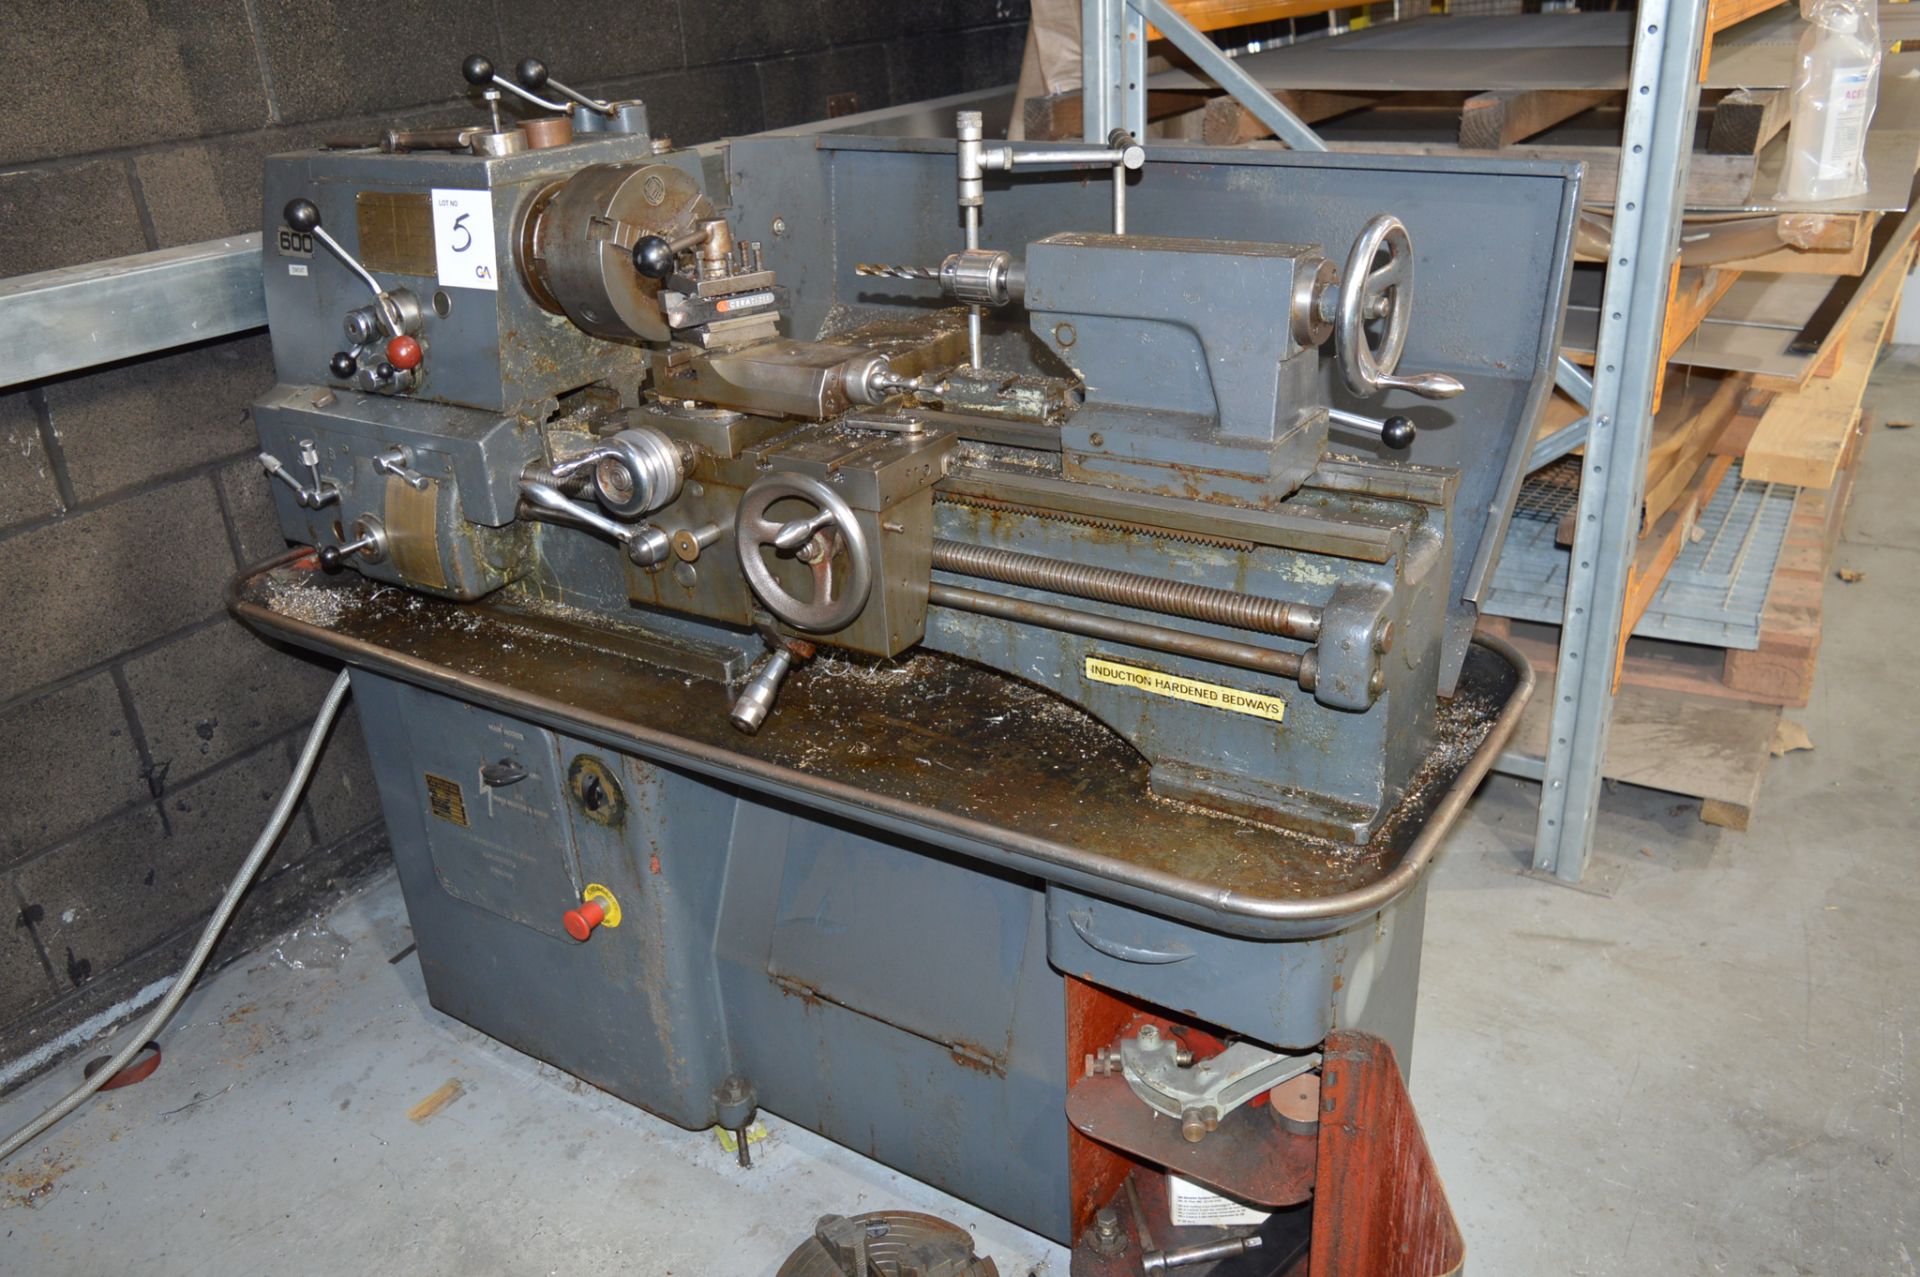 Colchester 600 centre lathe Swing approx. 13" x 20" S/N: 2/76502 c/w 3 & 4 jaw chucks